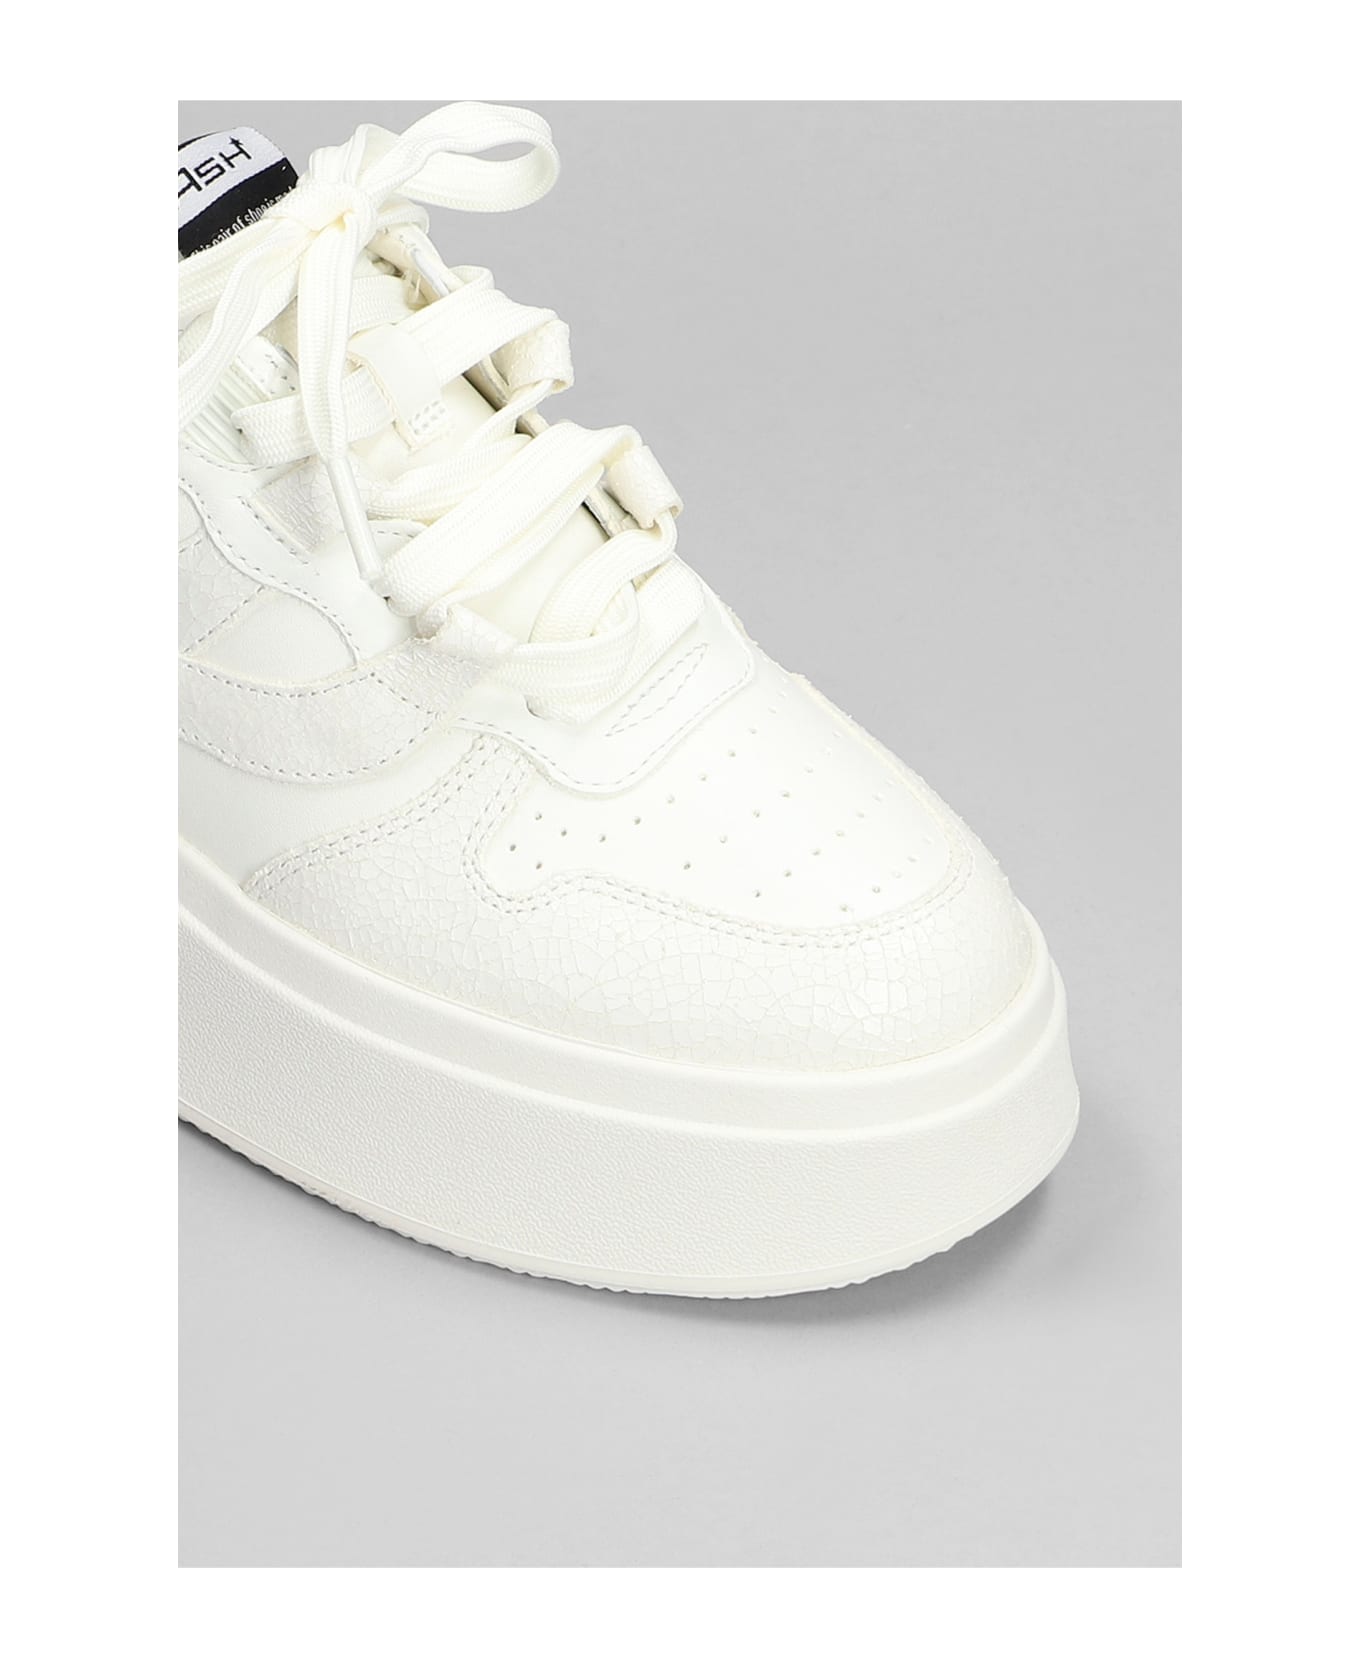 Ash Match Sneakers In White Leather - white ウェッジシューズ